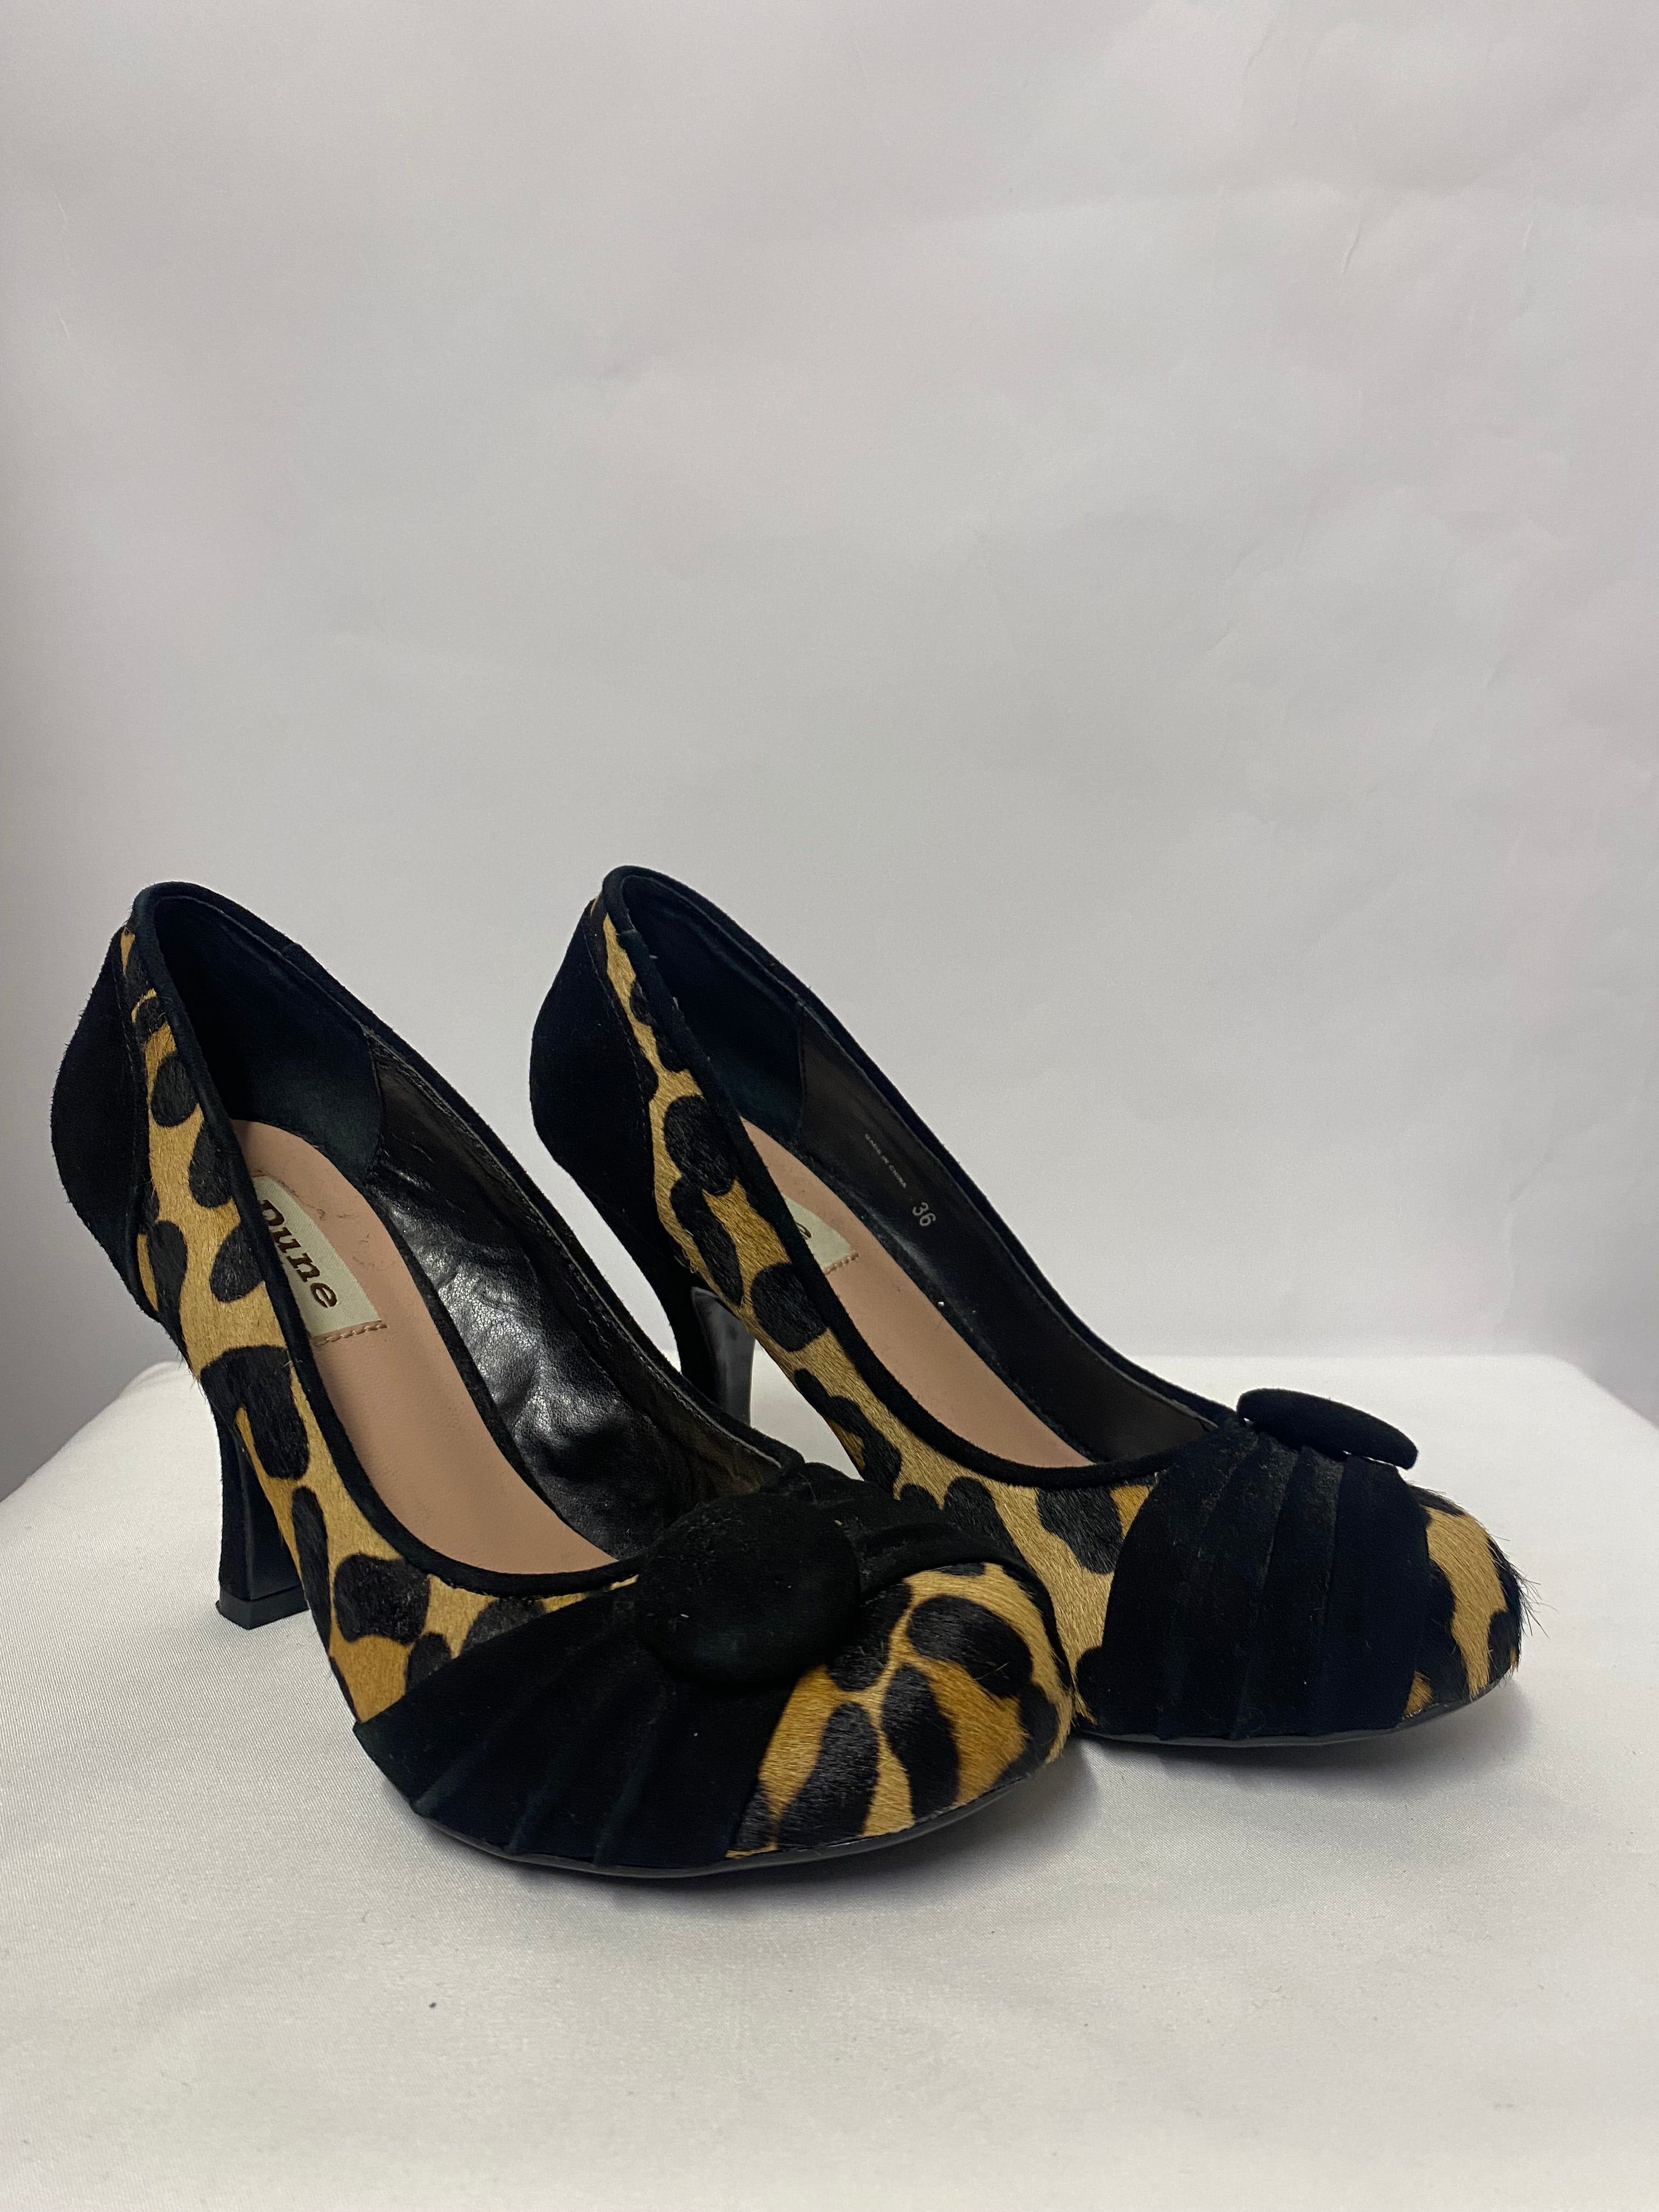 NEXT PONY HAIR/REAL LEATHER LEOPARD PRINT HEELS - SHOES SIZE Uk 4. #9 | eBay